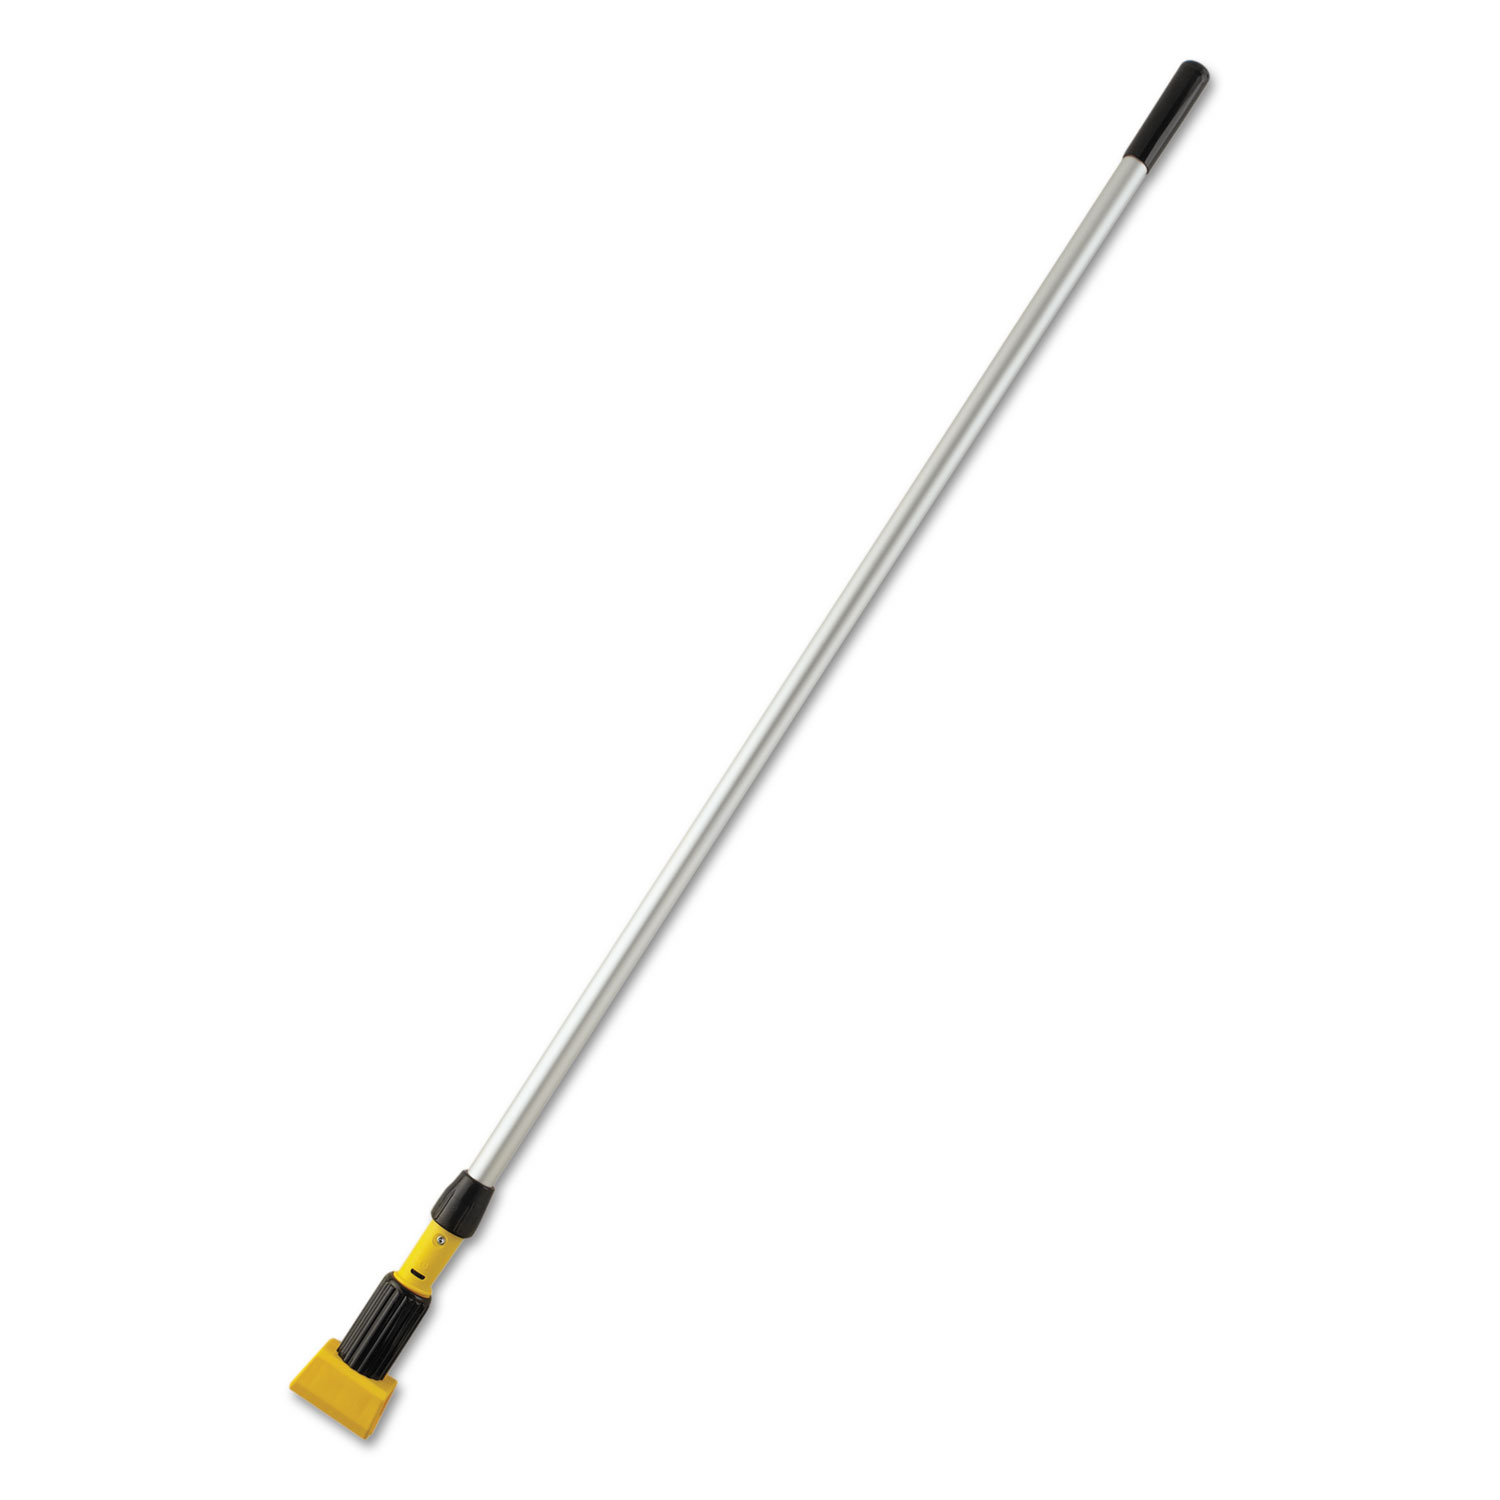  Rubbermaid Commercial FGH225000000 Gripper Mop Handle, Aluminum, Yellow/Gray, 54 (RCPH225) 